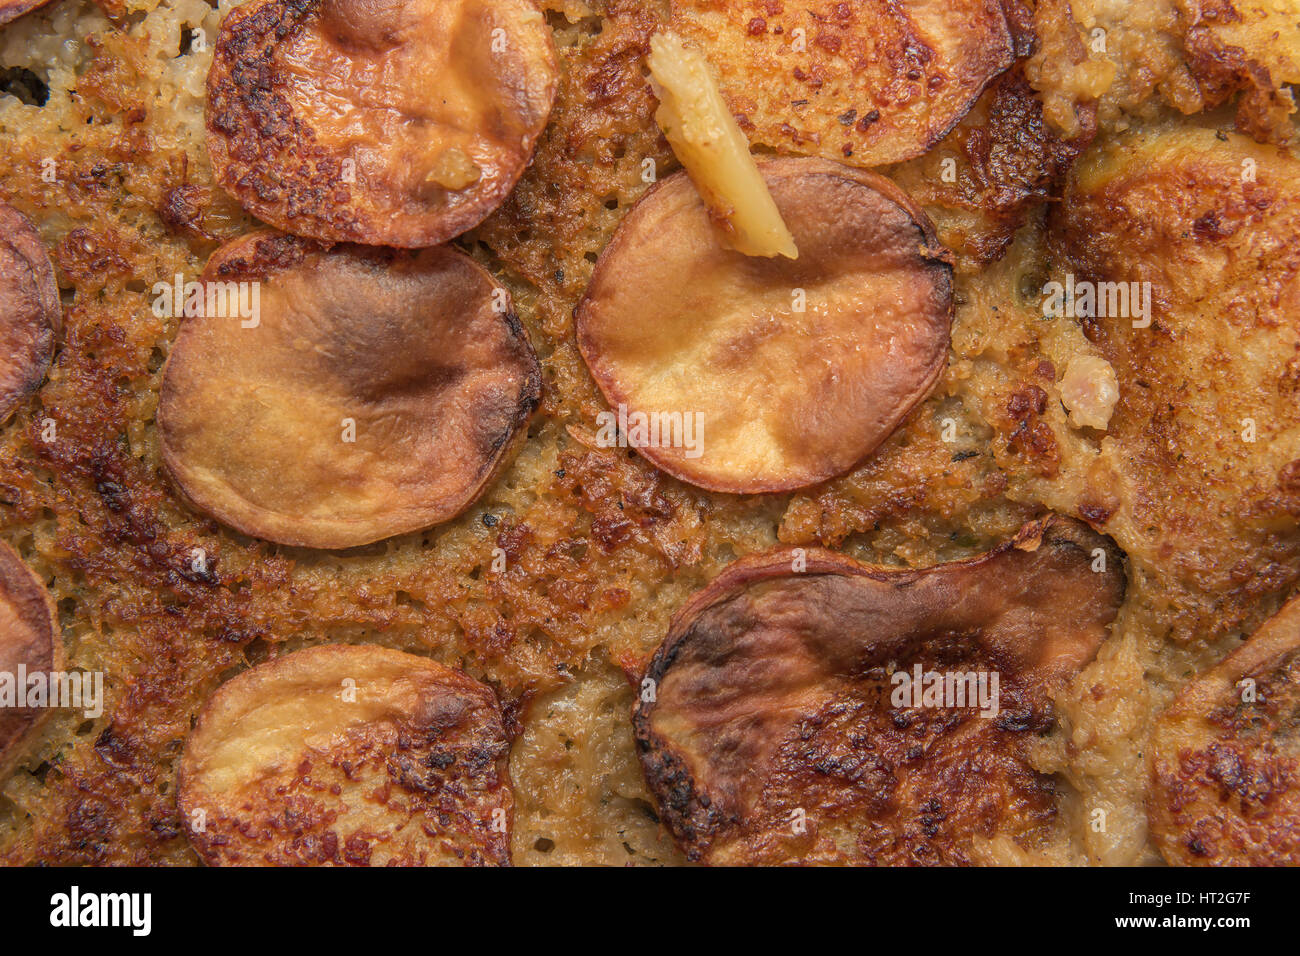 Crunchy Potato Serbian Moussaka with minced pork meat and eggs baked in high temperature oven, closeup with creative lighting Stock Photo